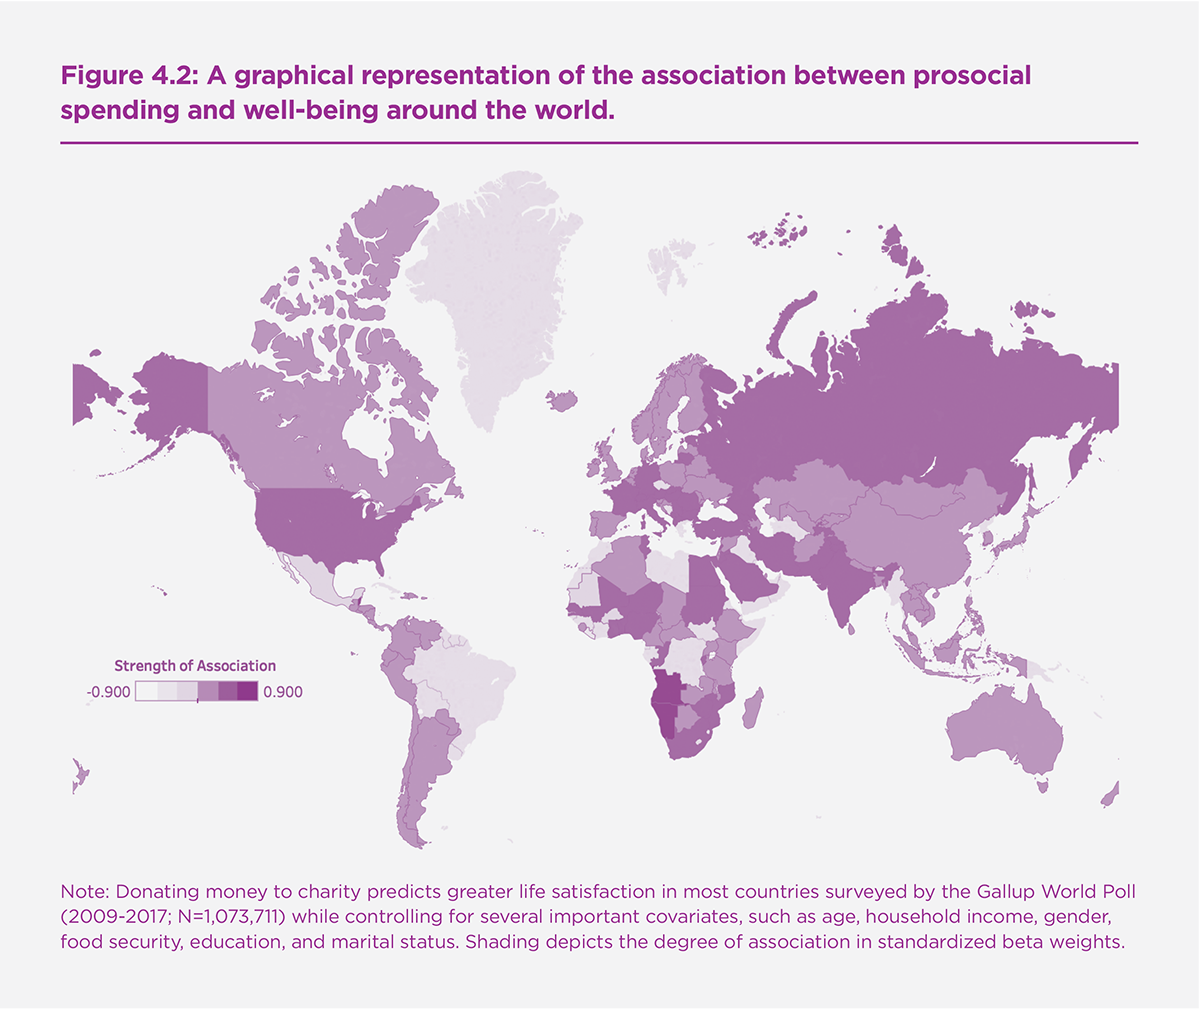 Figure 4.2. A graphical representation of the association between prosocial spending and well-being around the world.